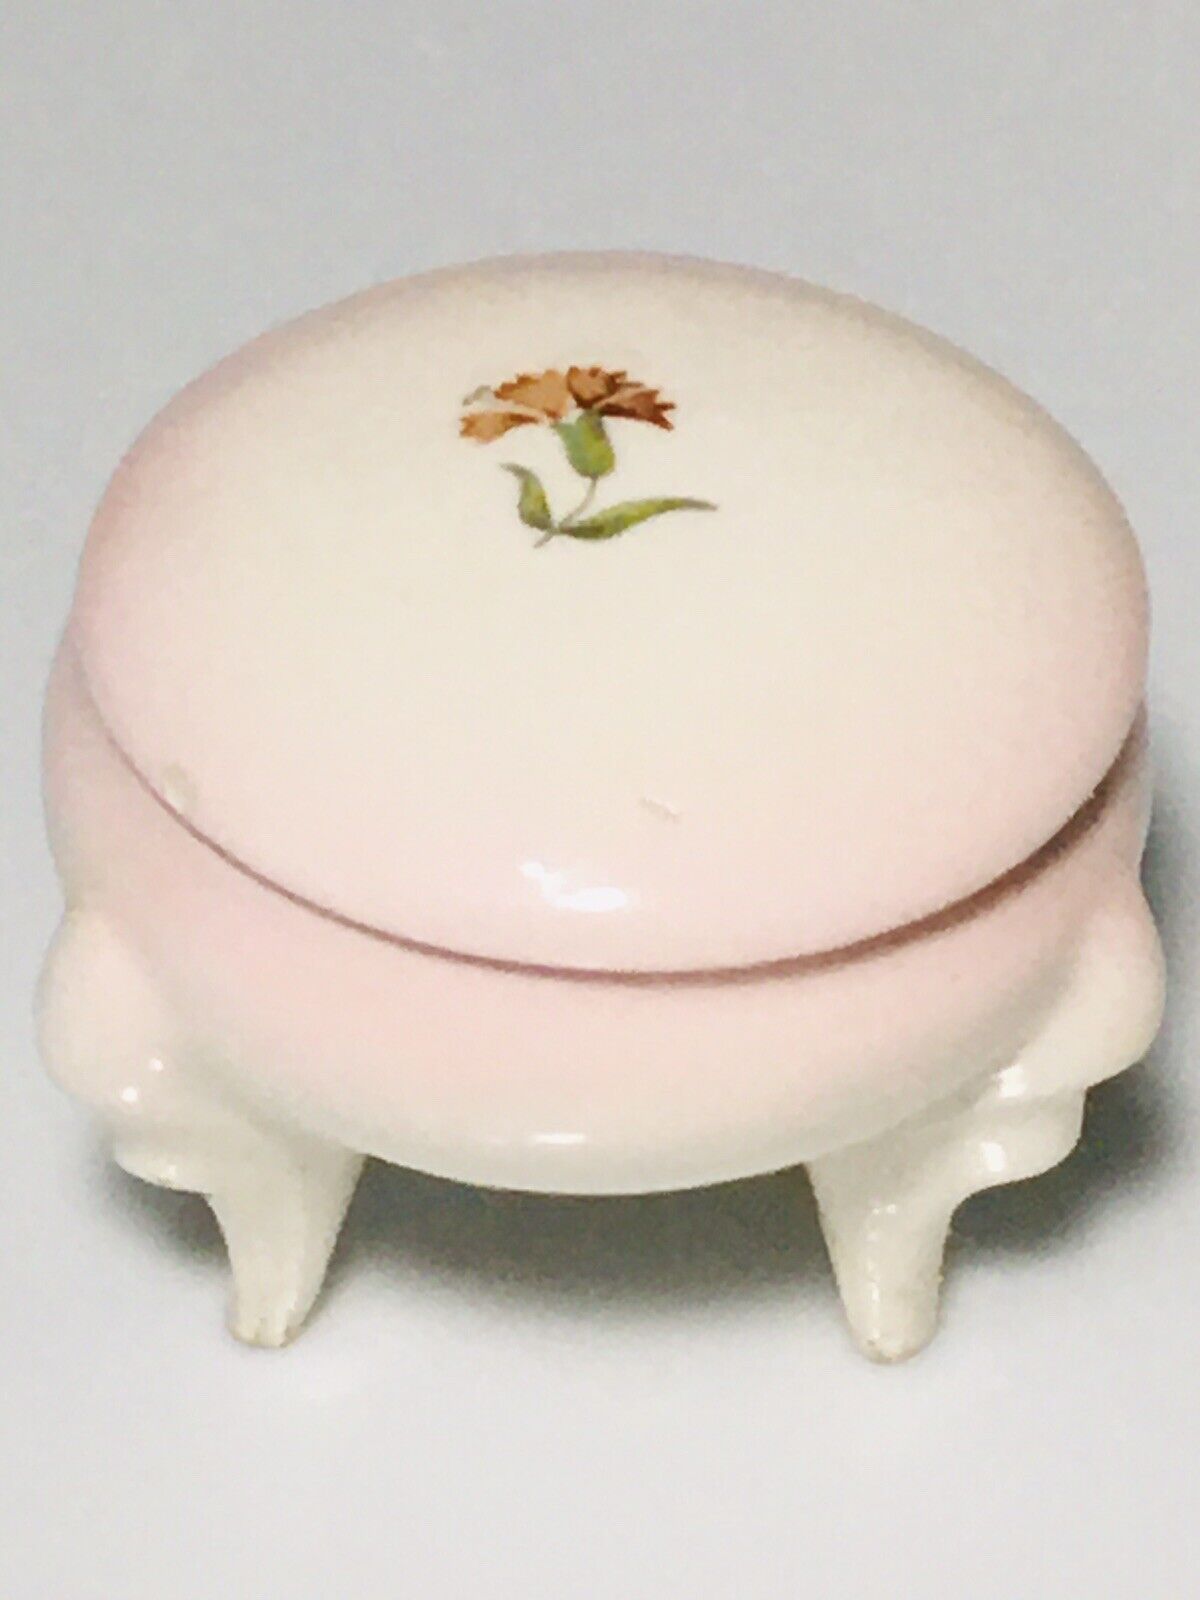 Vintage Retro Pill Box Tooth Fairy Box Jewelry Box French Footed w Lid Floral